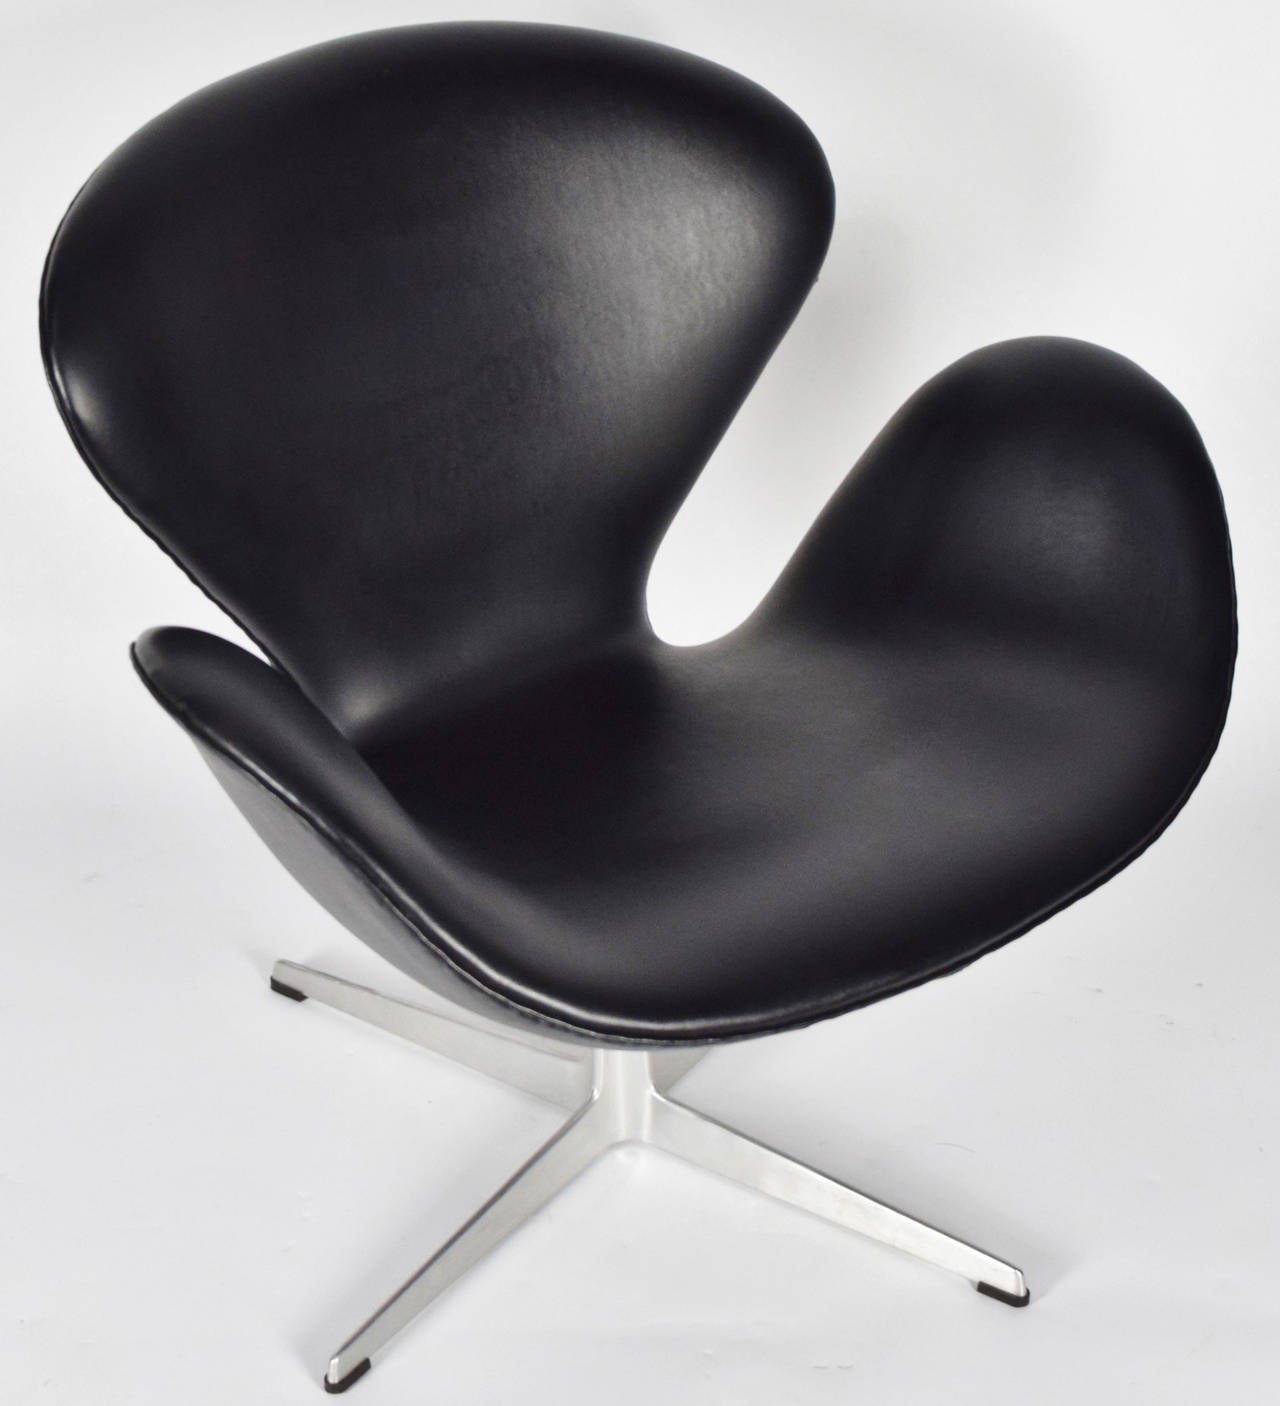 A beautiful Swan Chair designed by Arne Jacobsen for Fritz Hansen. Tags intact. There is a tear in the vinyl on the back.